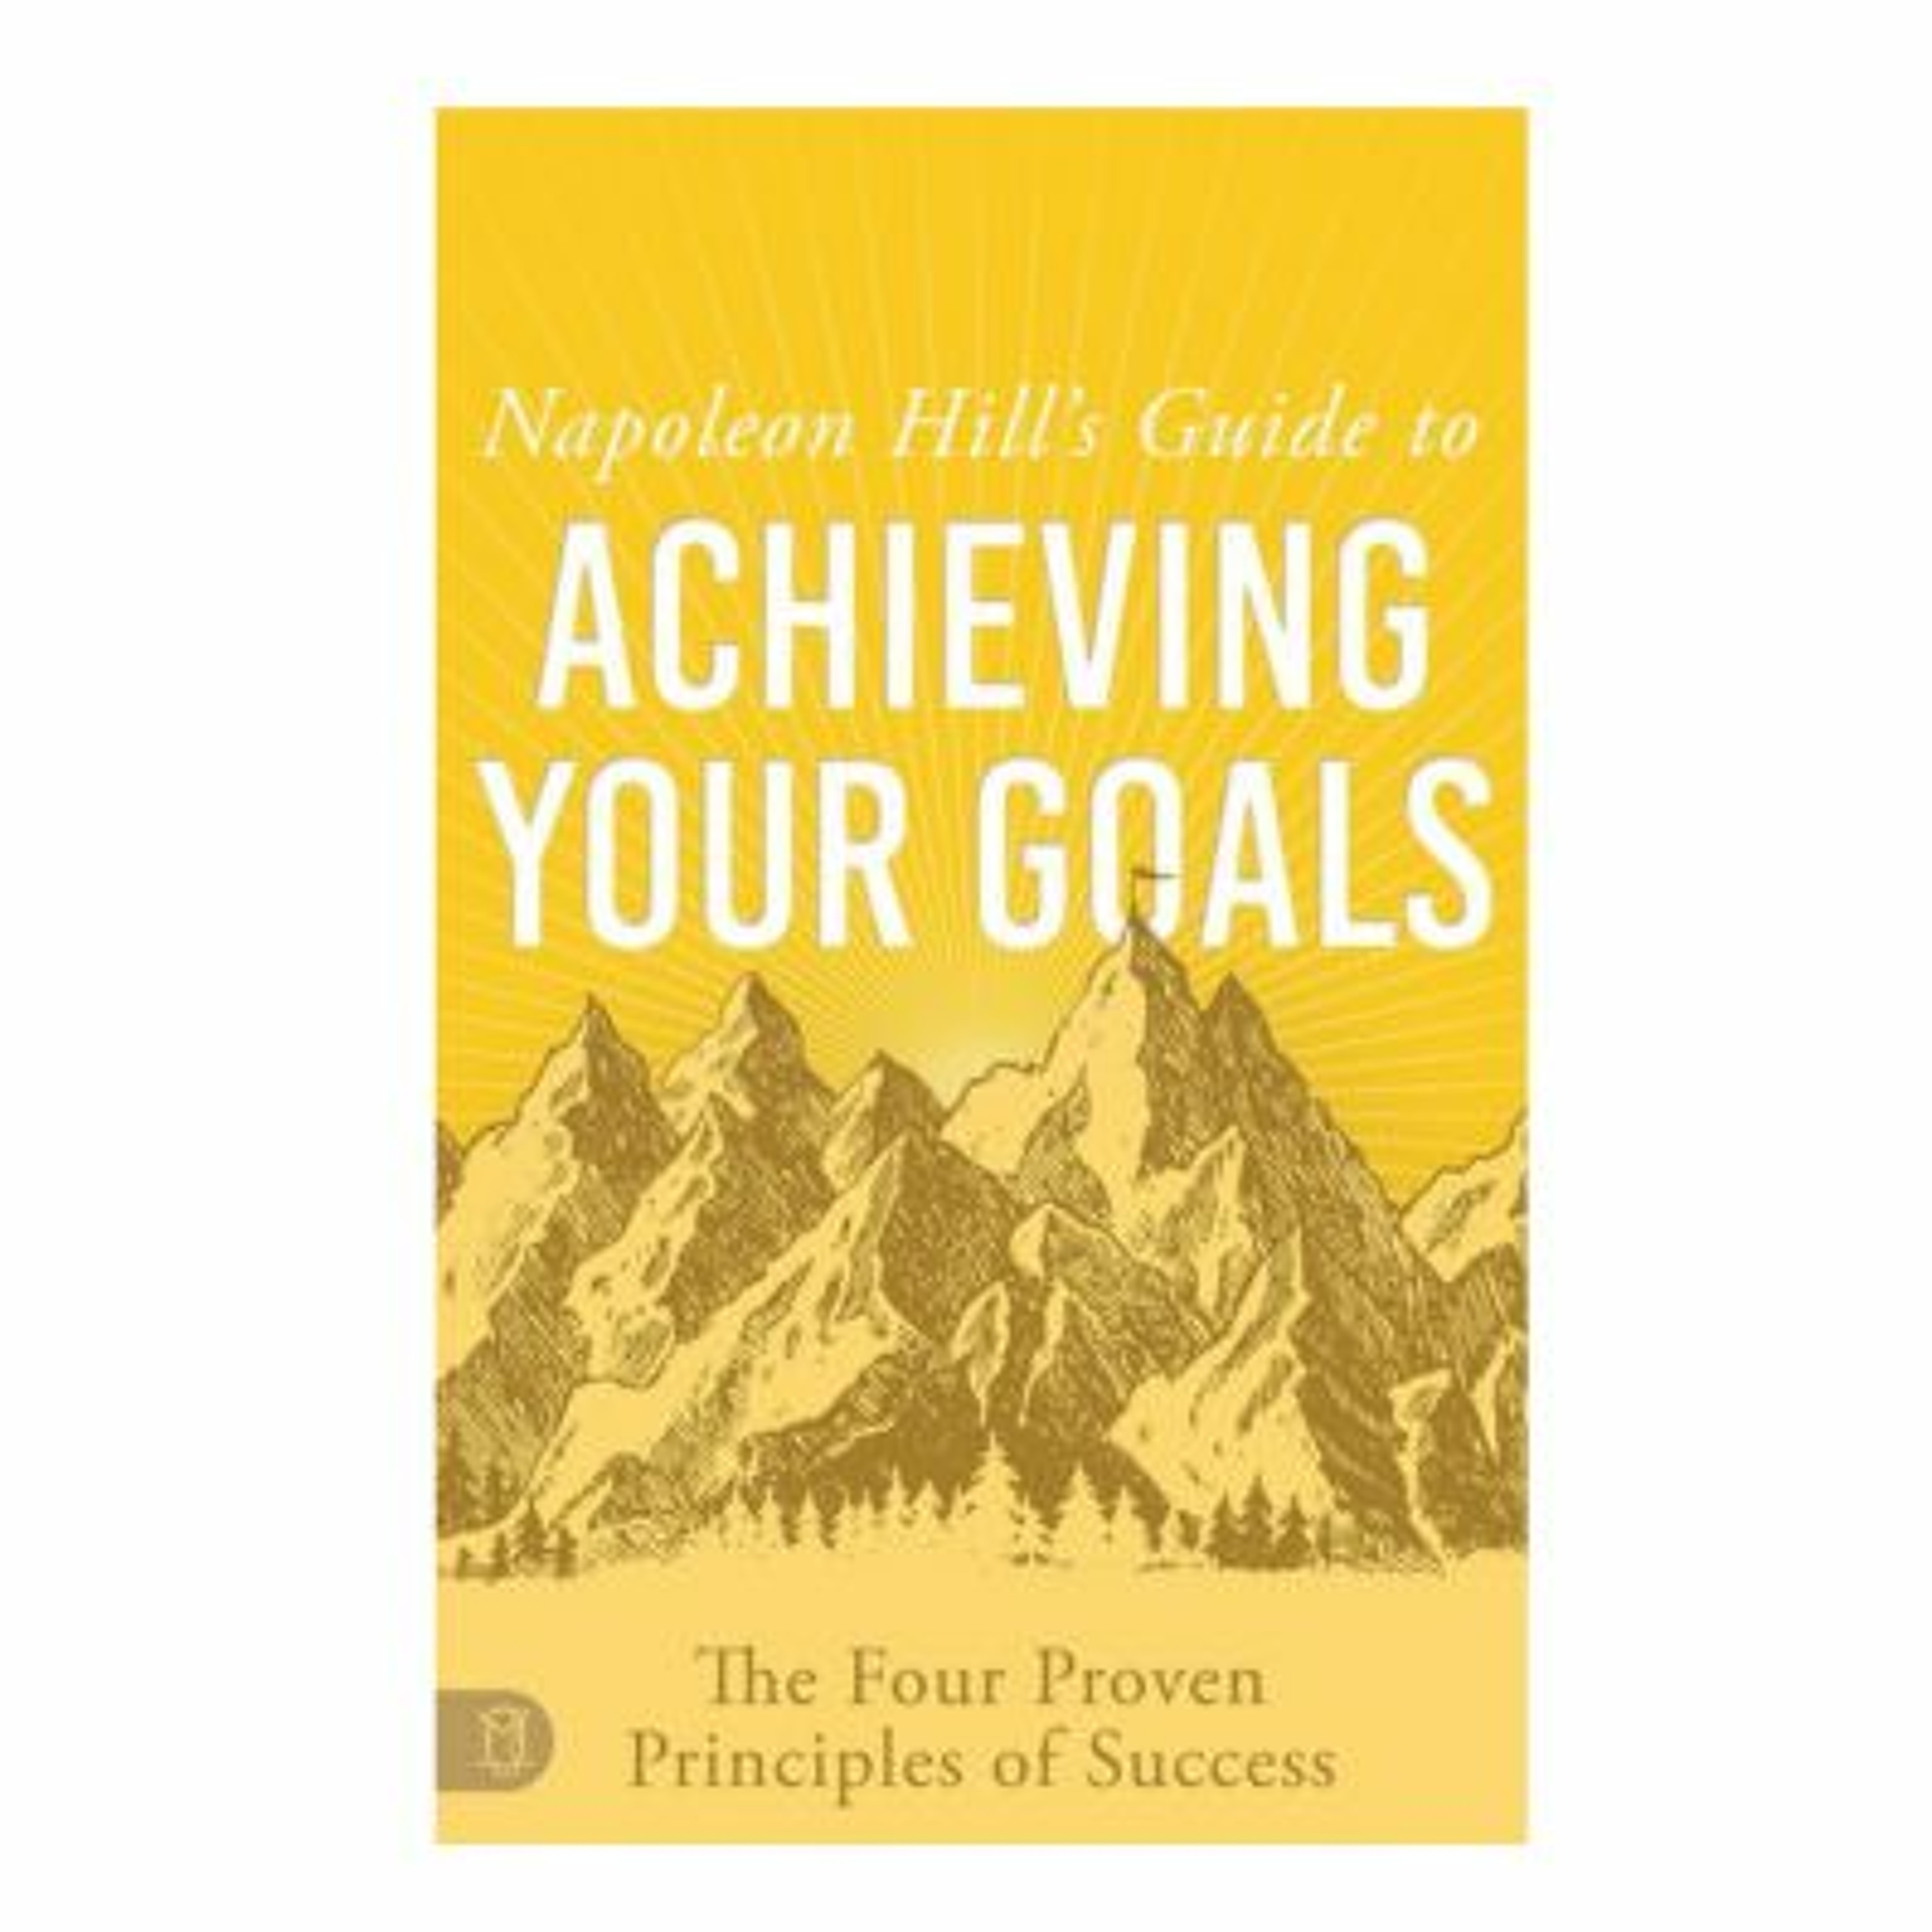 Podcast 1100: Napoleon Hill's Guide to Achieving Your Goals with Don Green